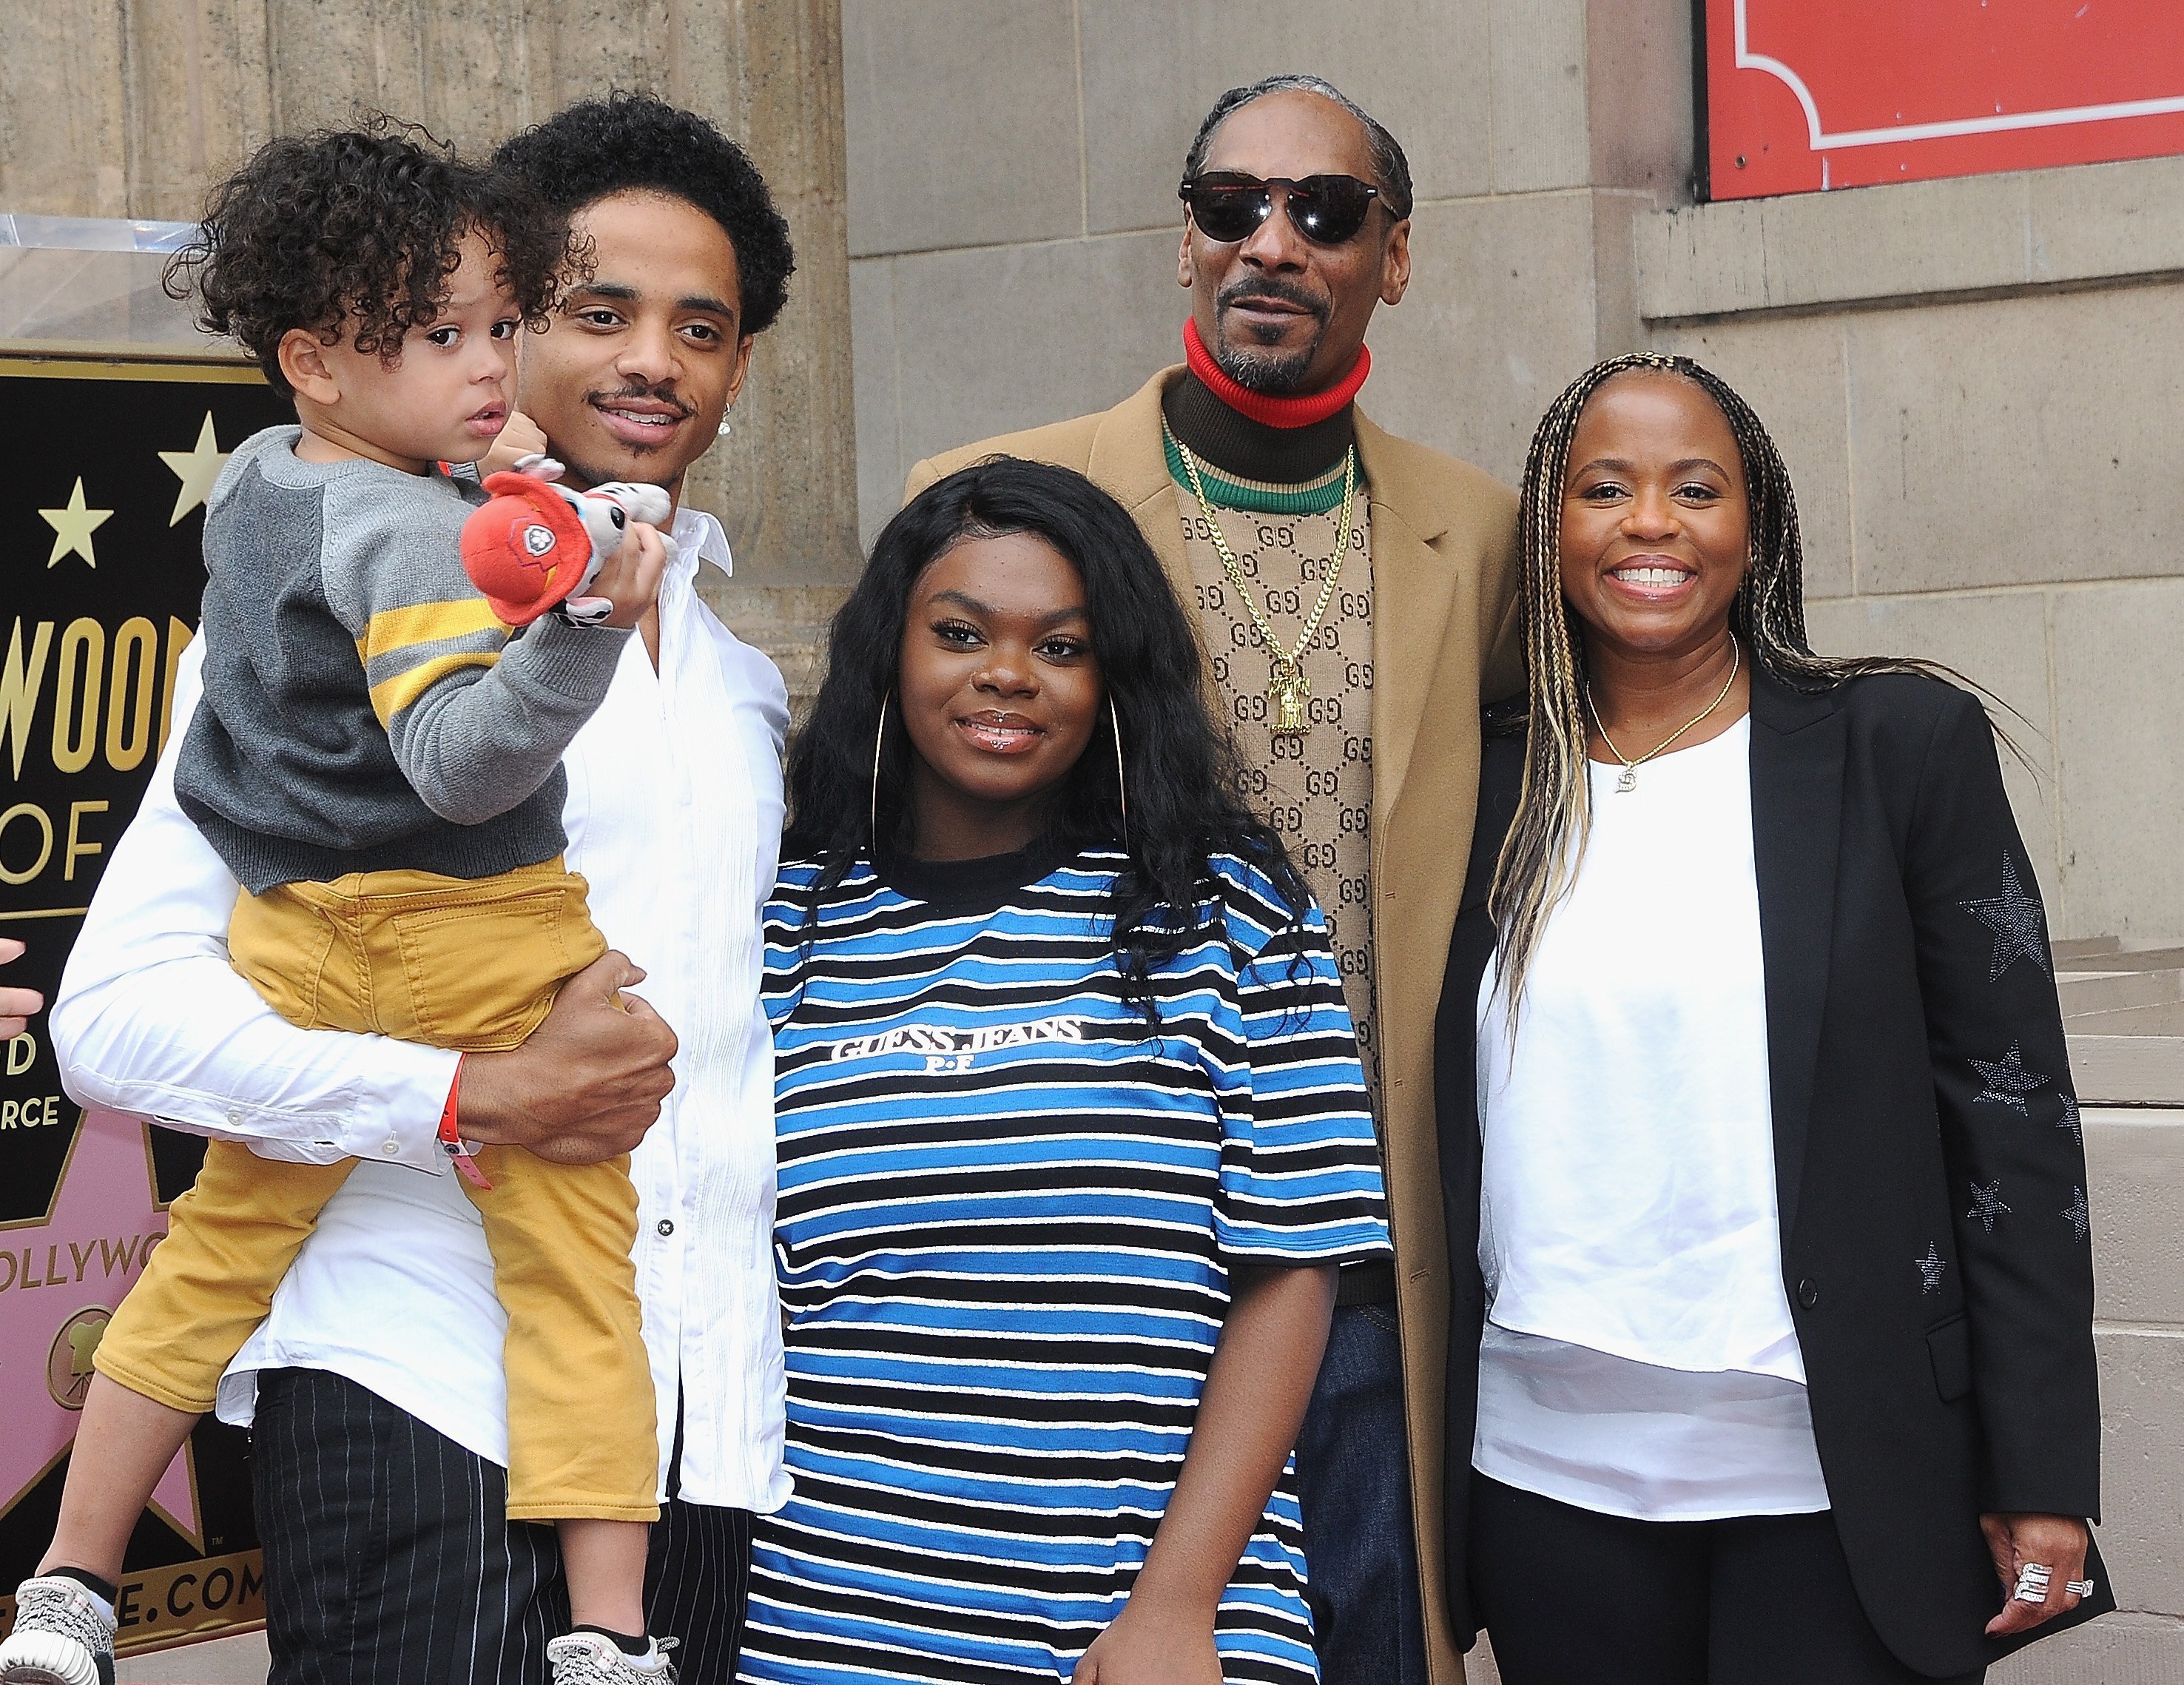 Snoop Dogg and Shante Taylor with family attends Snoop Dogg's star ceremony on The Hollywood Walk of Fame held on November 19, 2018 | Photo: GettyImages